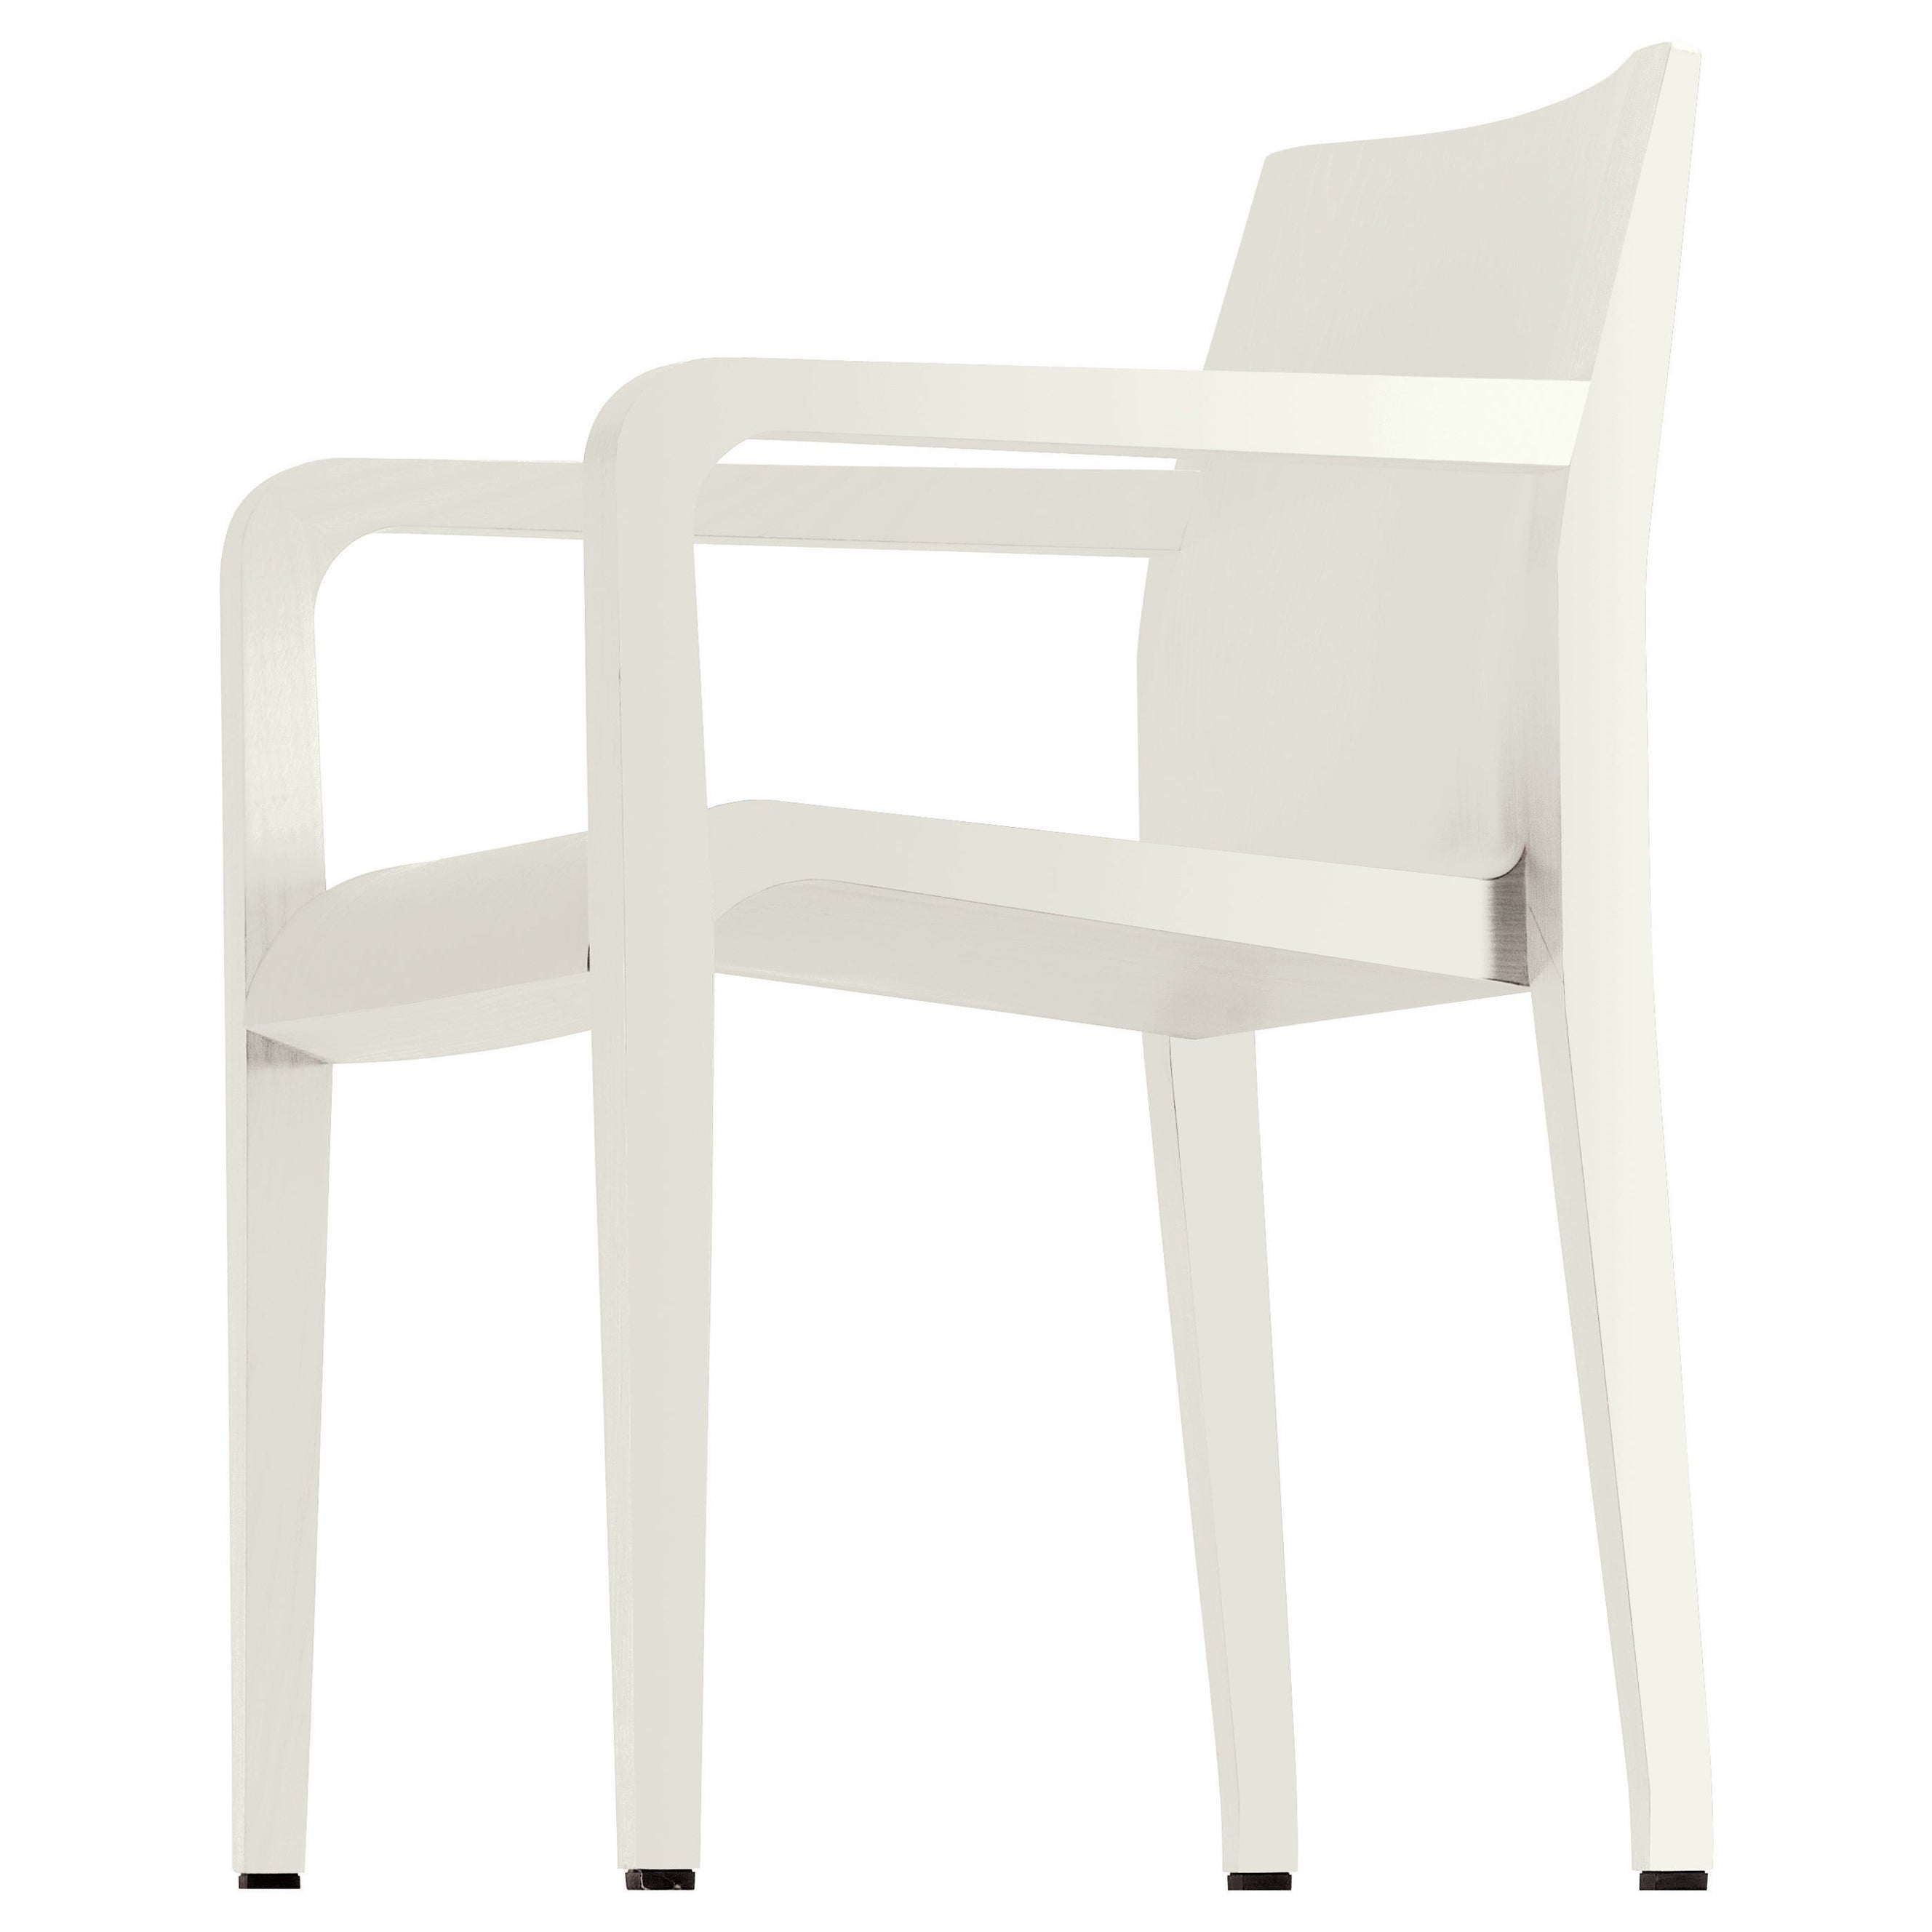 Alias 304 Laleggera Armrest Chair in White Color Stained Wood by Riccardo Blumer For Sale